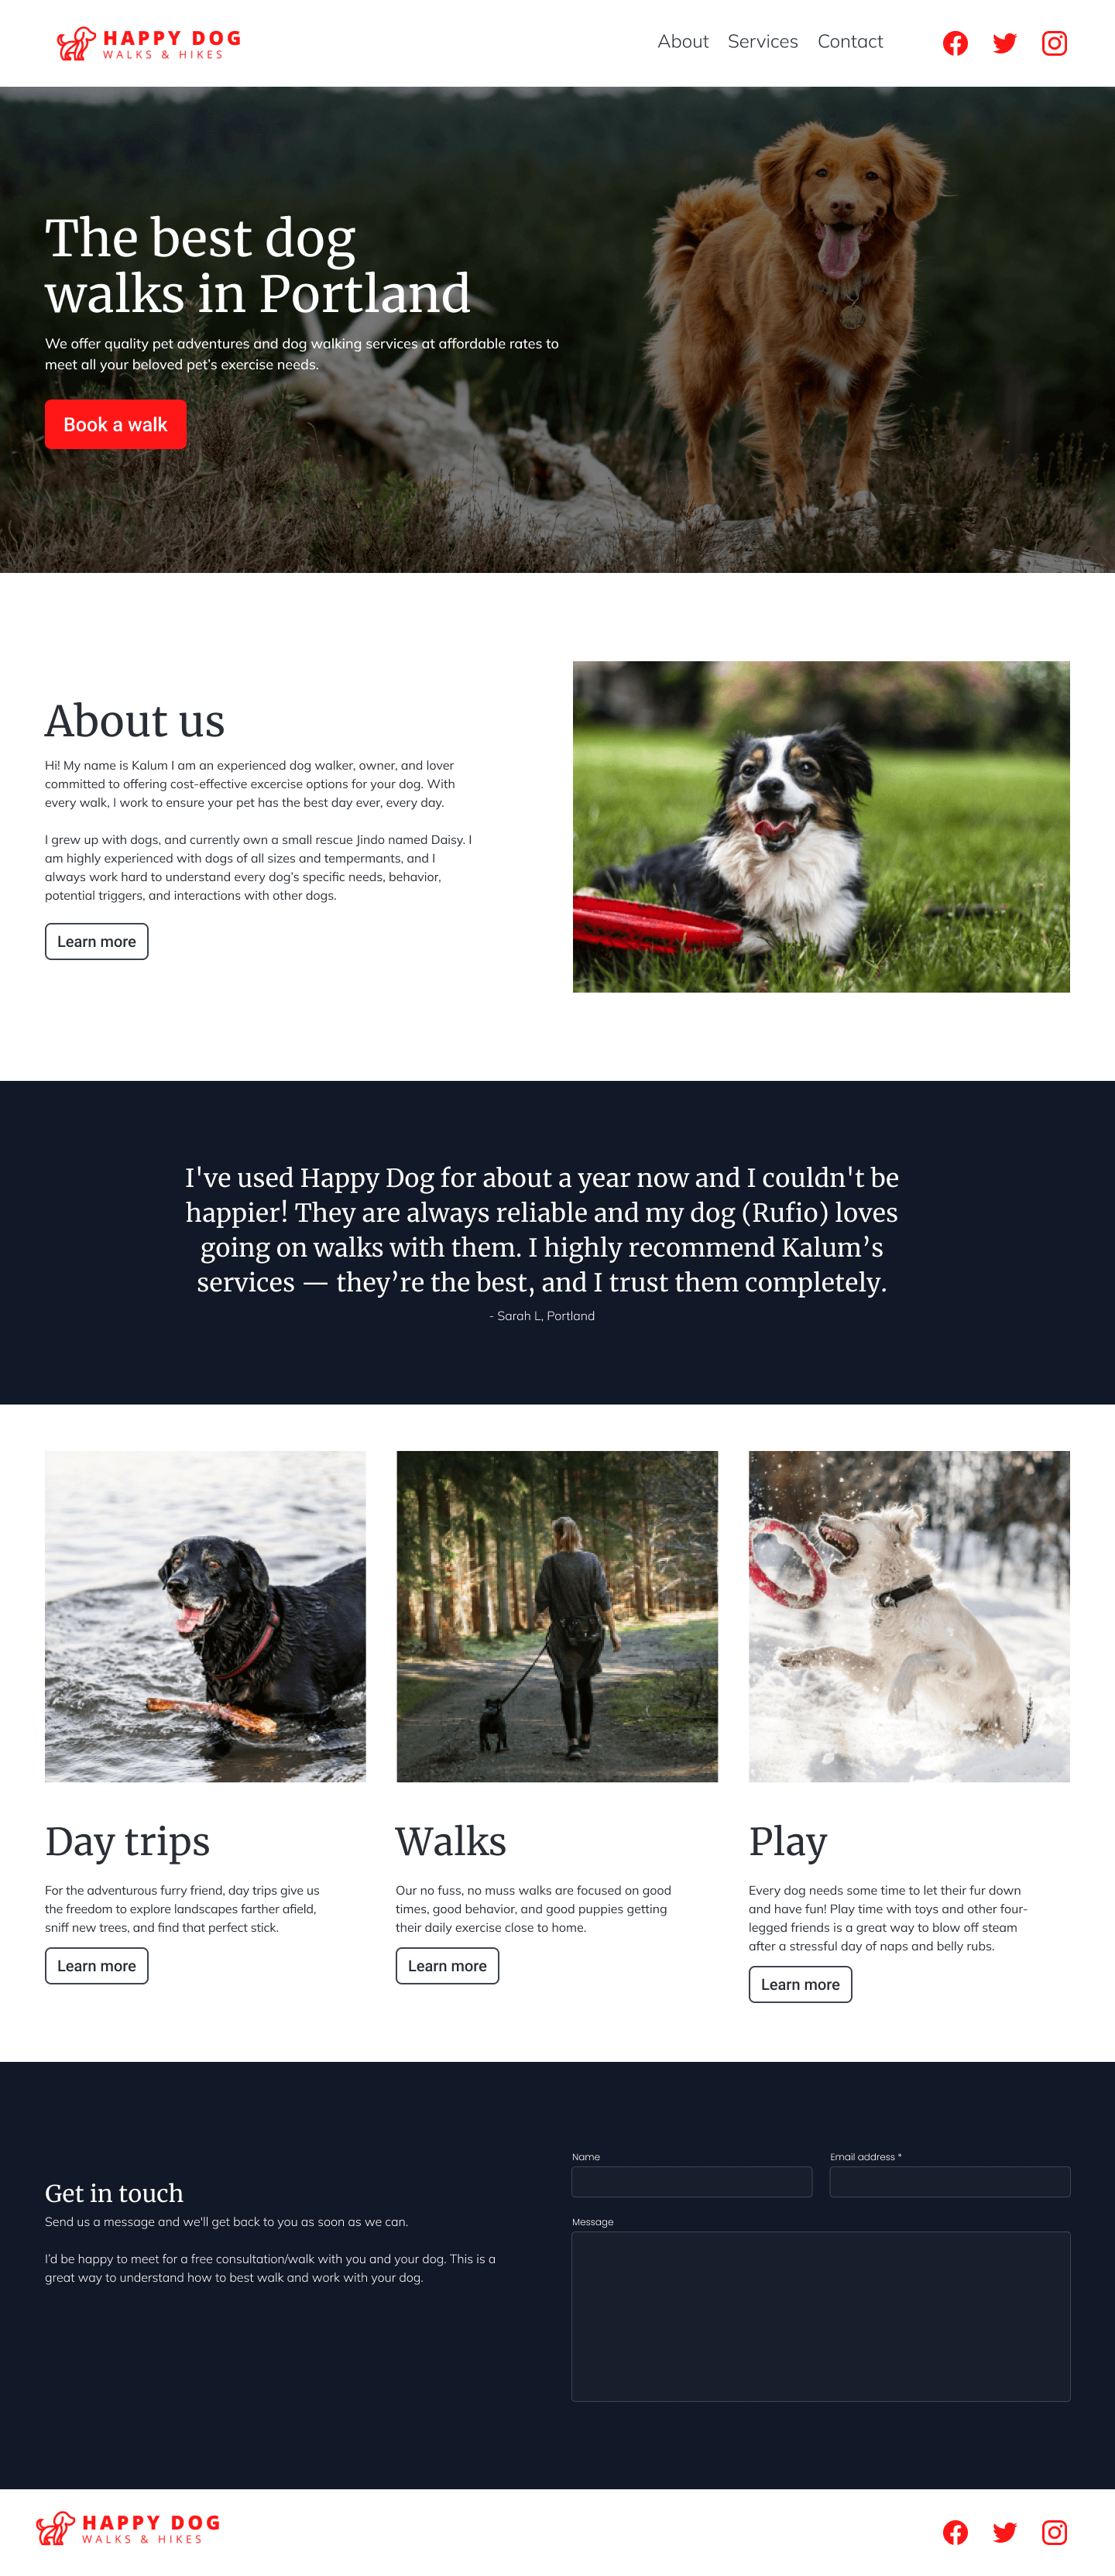 Image of entire dog walking website template